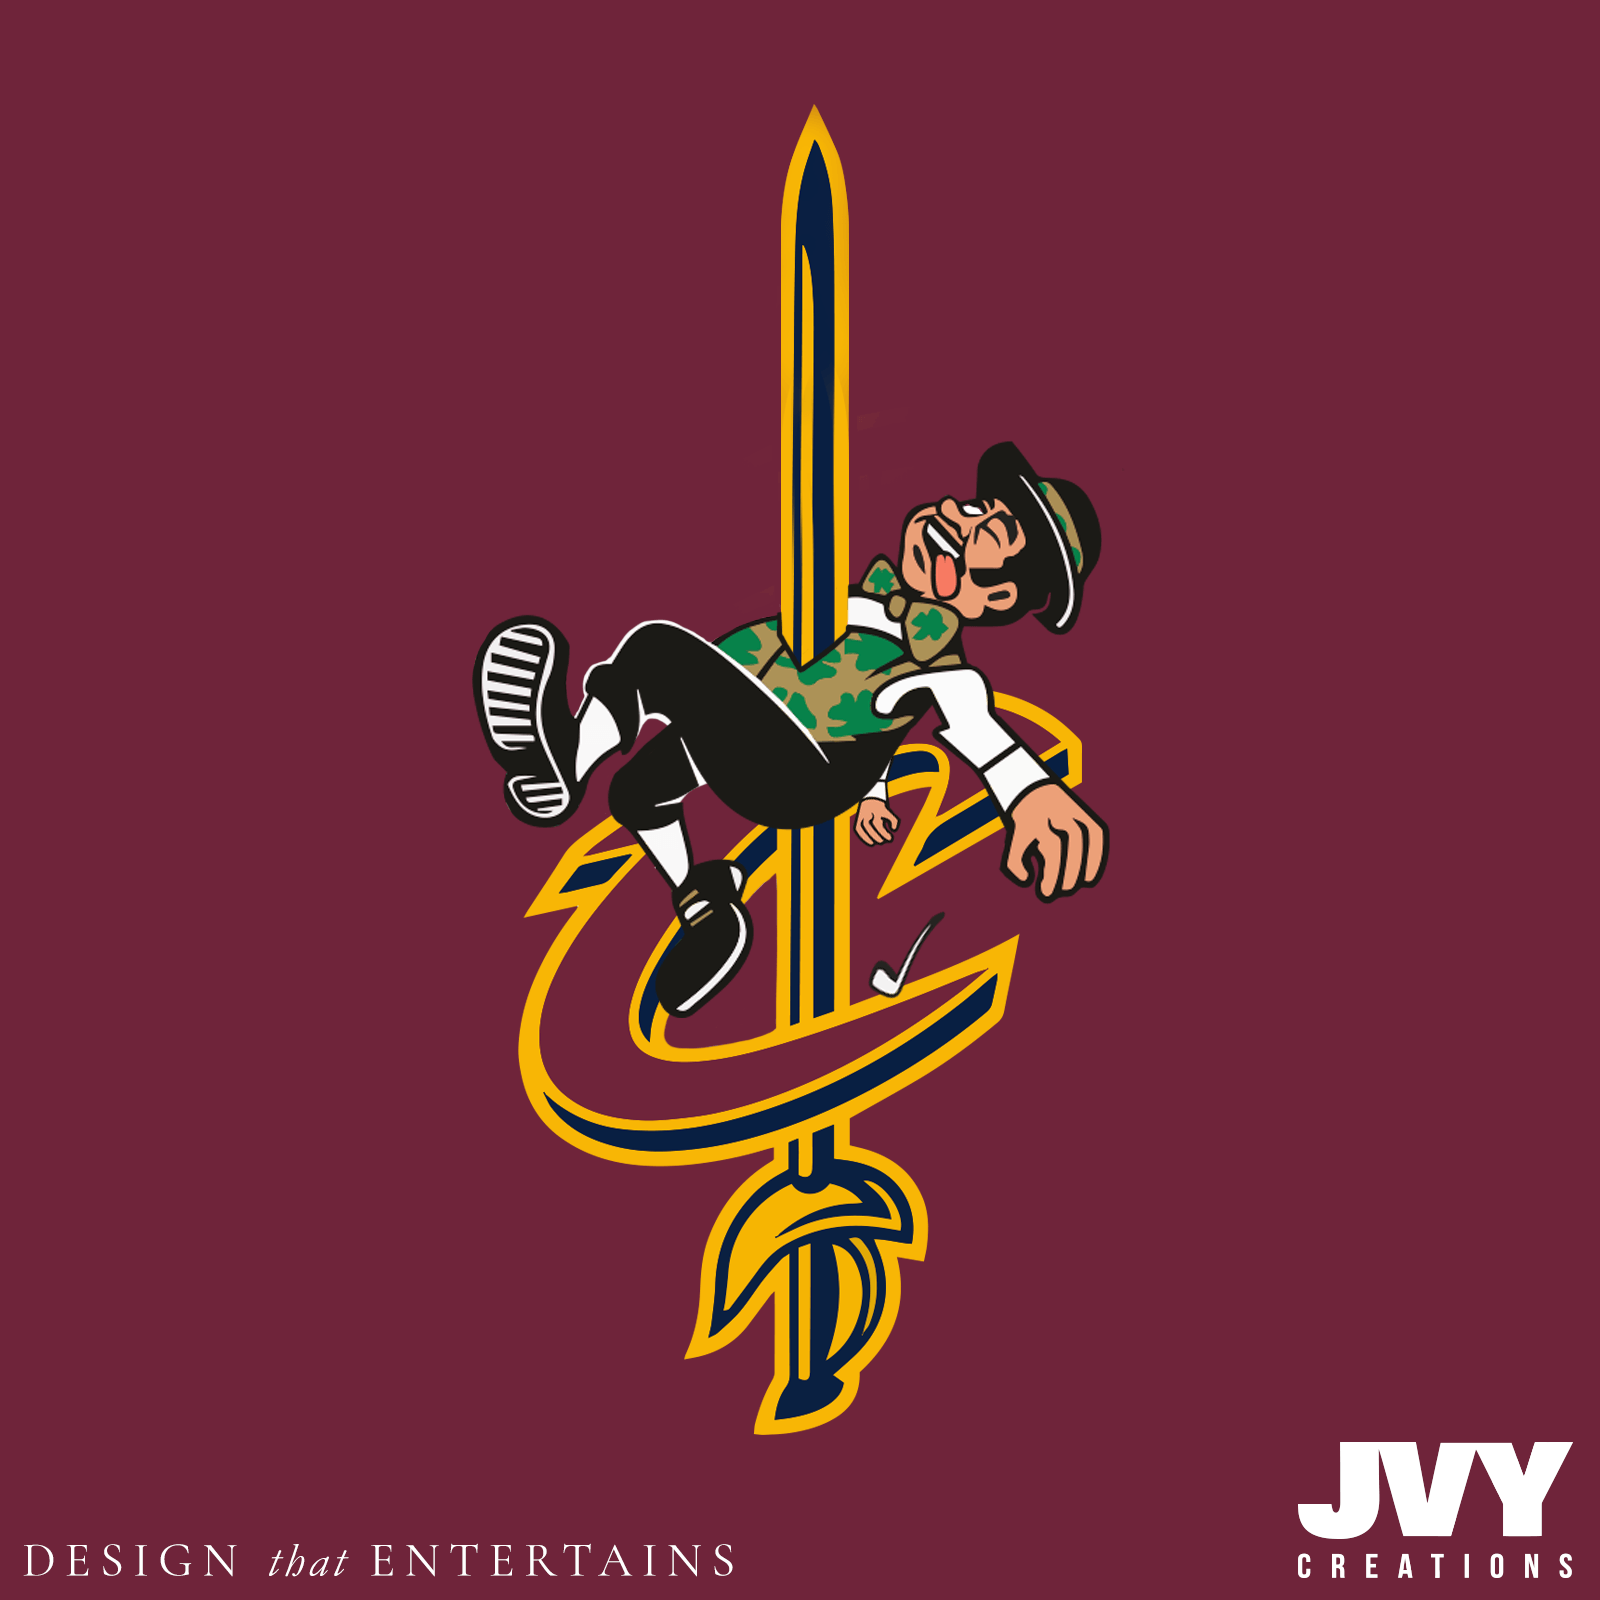 Cavs Logo - New Cavs logo as they beat the Celtics and go to the NBA Finals